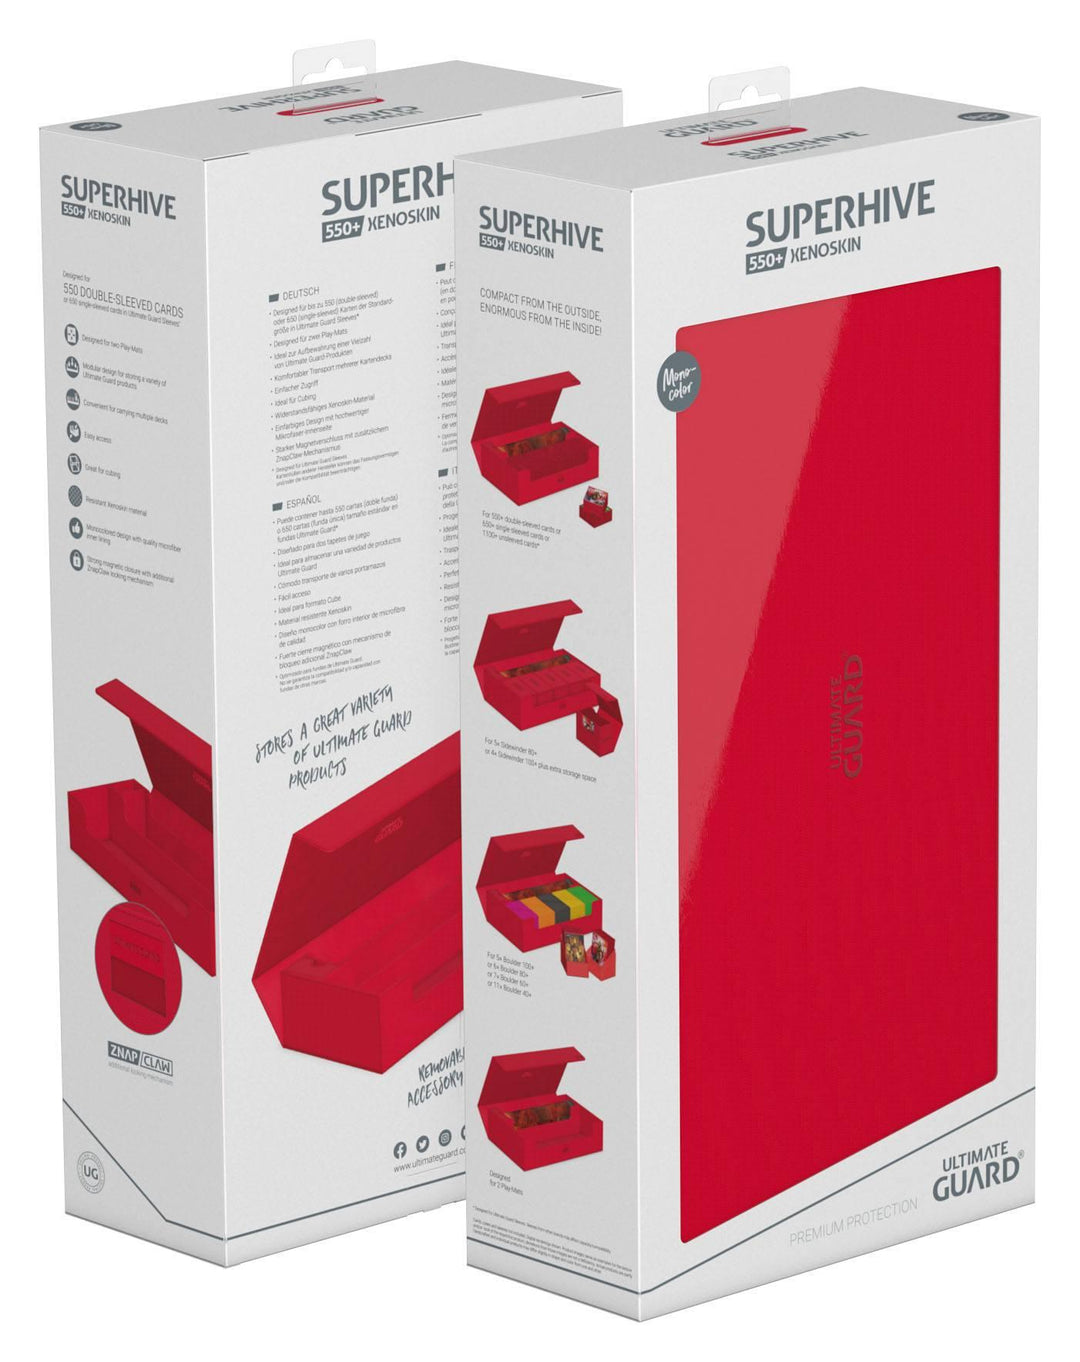 Ultimate Guard Superhive 550+ XenoSkin Monocolor Red / Rot